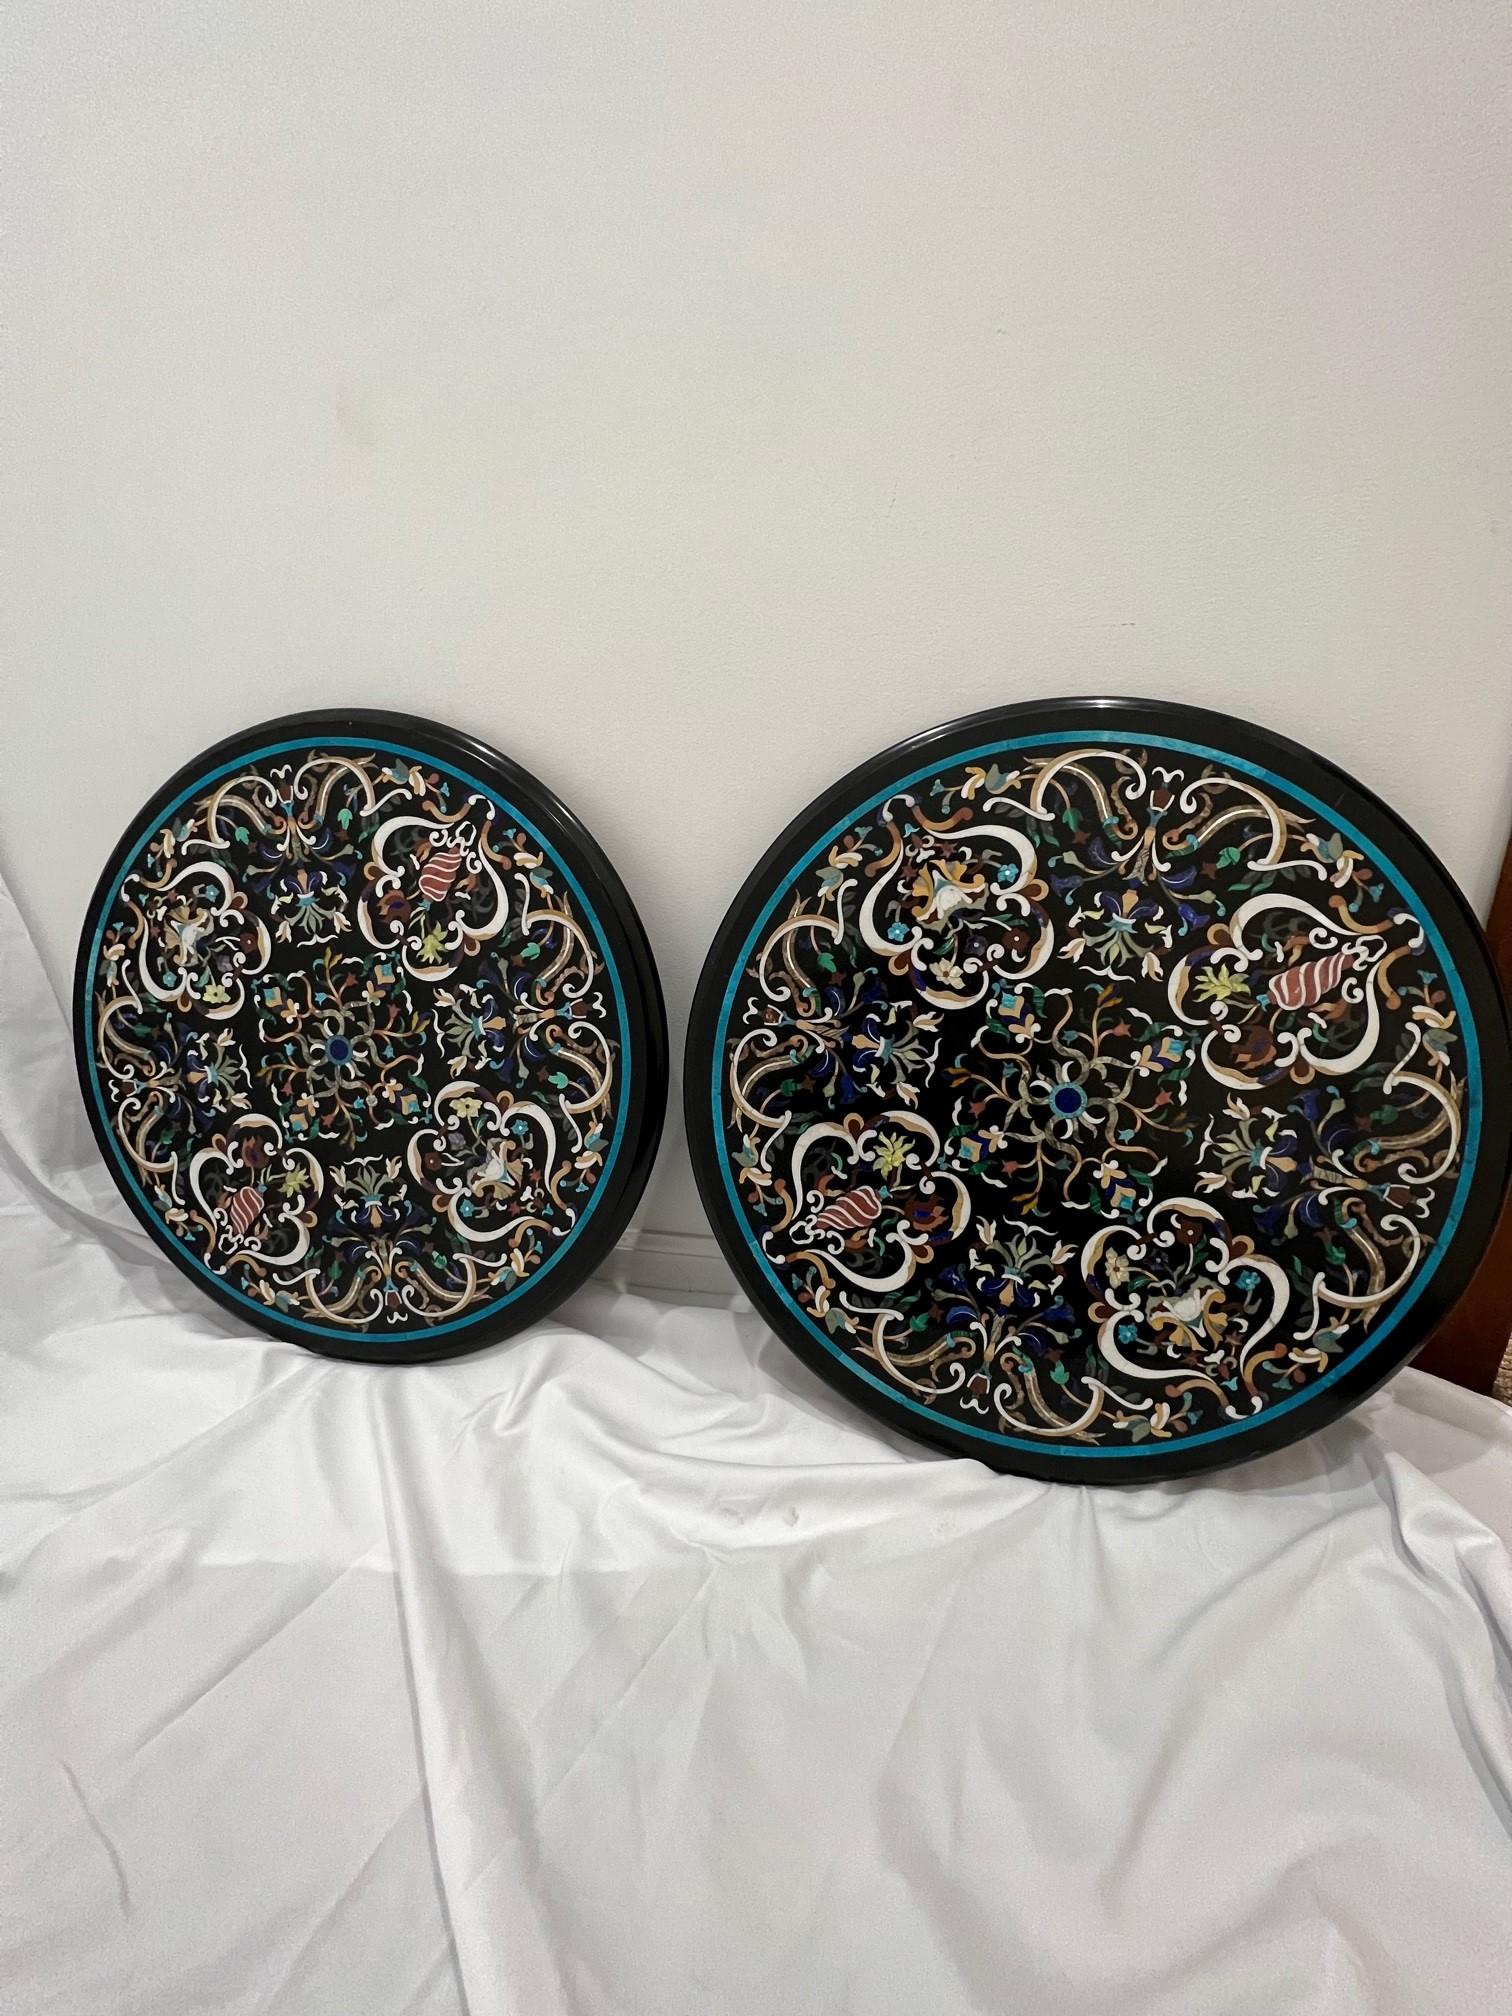 Beautiful matching pair of Pietra Dura round table tops loaded with semi-precious stones including lapis and turquoise. Each top is handmade and it is unusual to have a matching pair they are amazing.